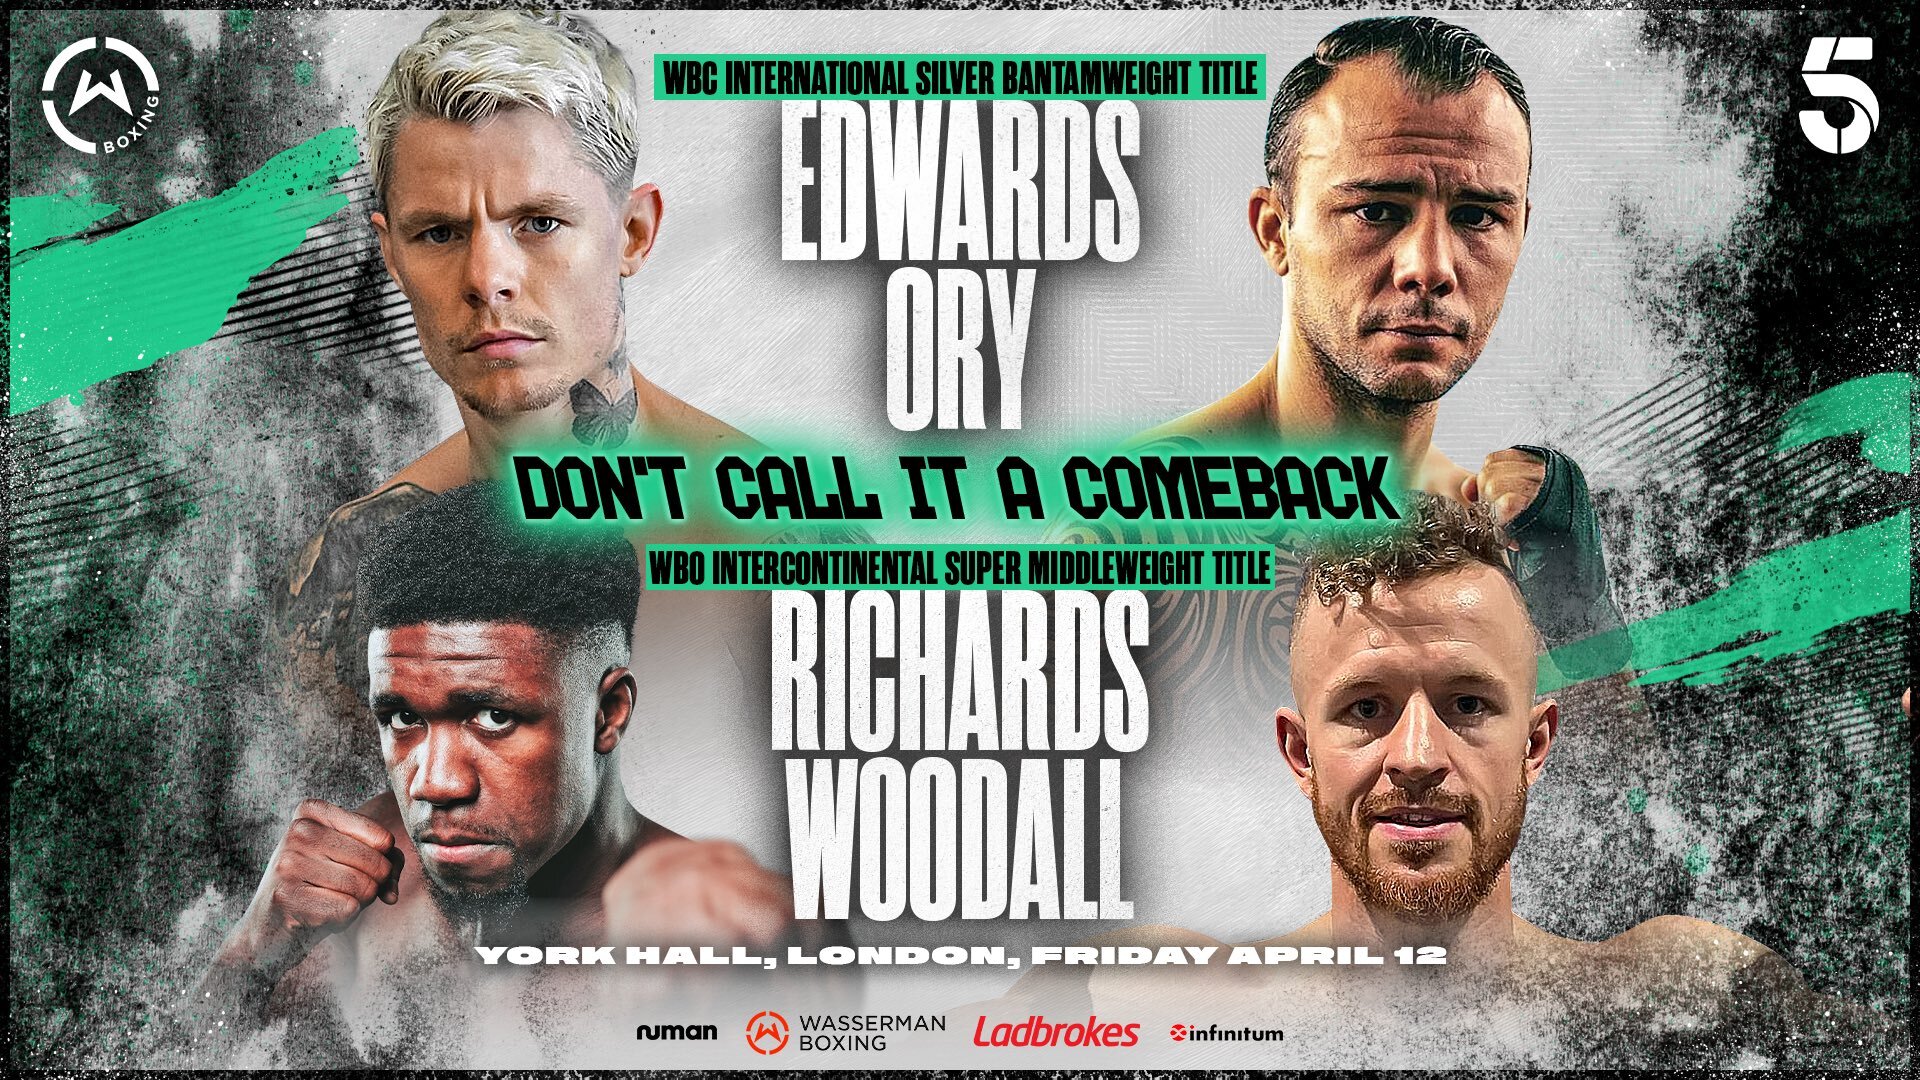 Charlie Edwards - Georges Ory Announced For April 12